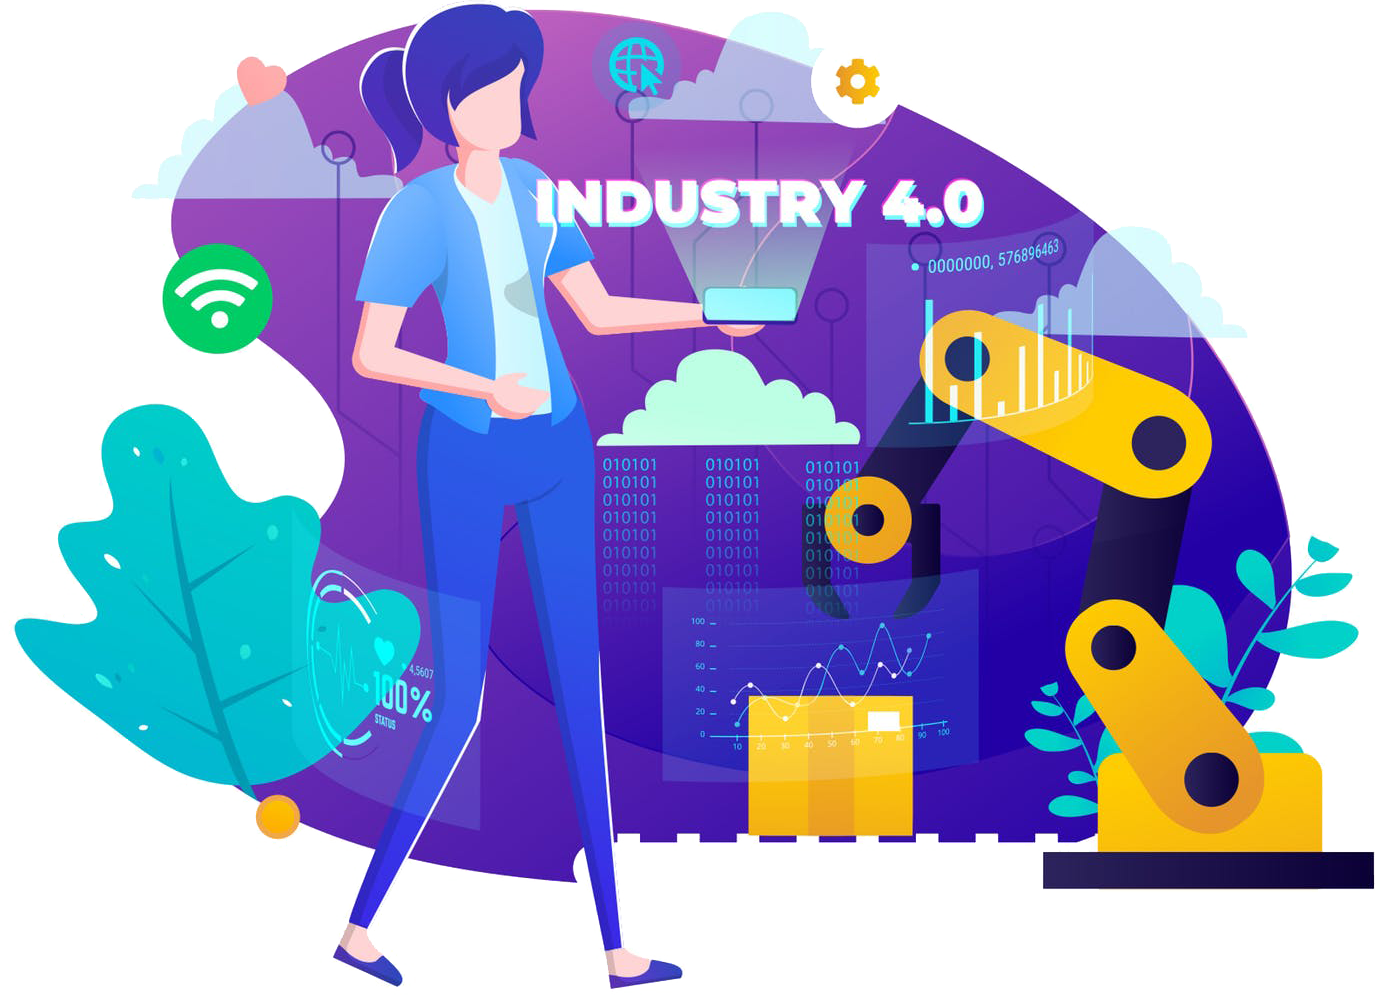 Industry 4.0 Image